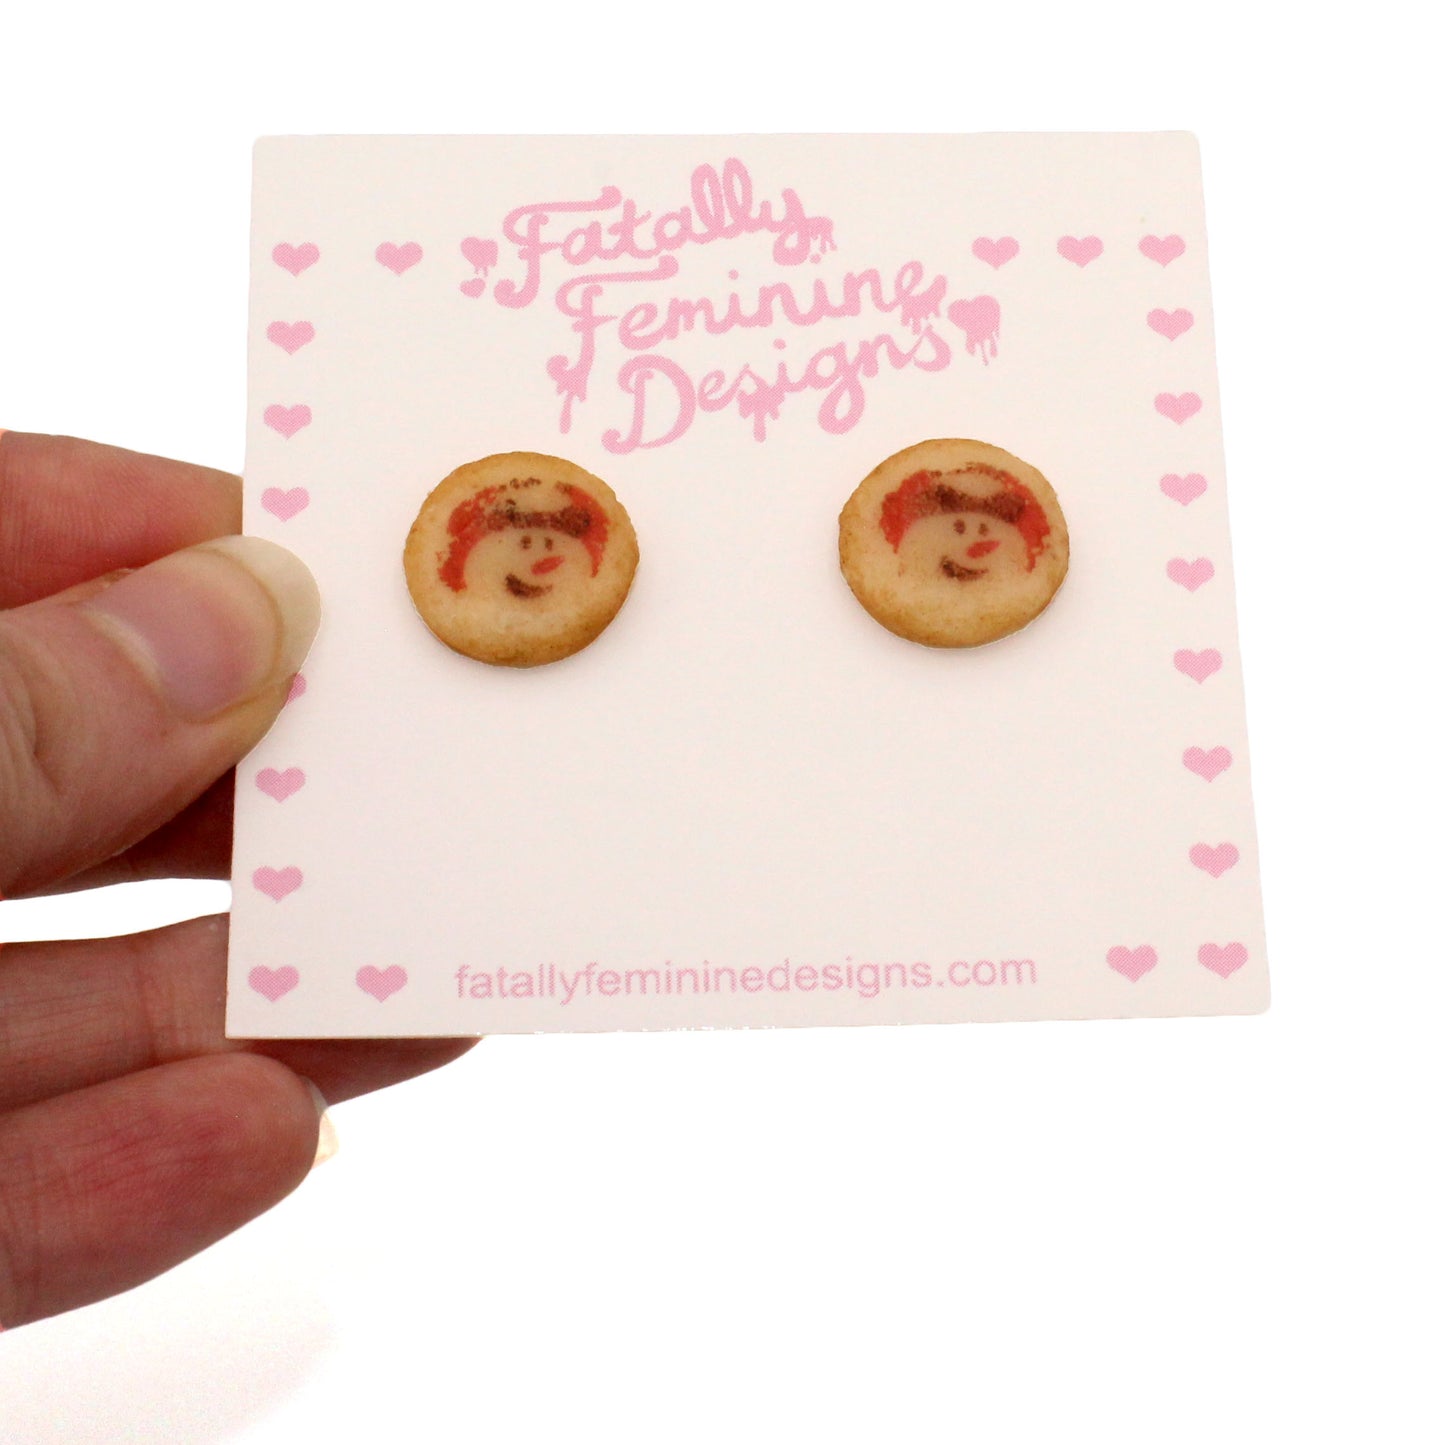 Snowman Sugar Cookie Stud Earrings - Limited Edition Holiday Collection